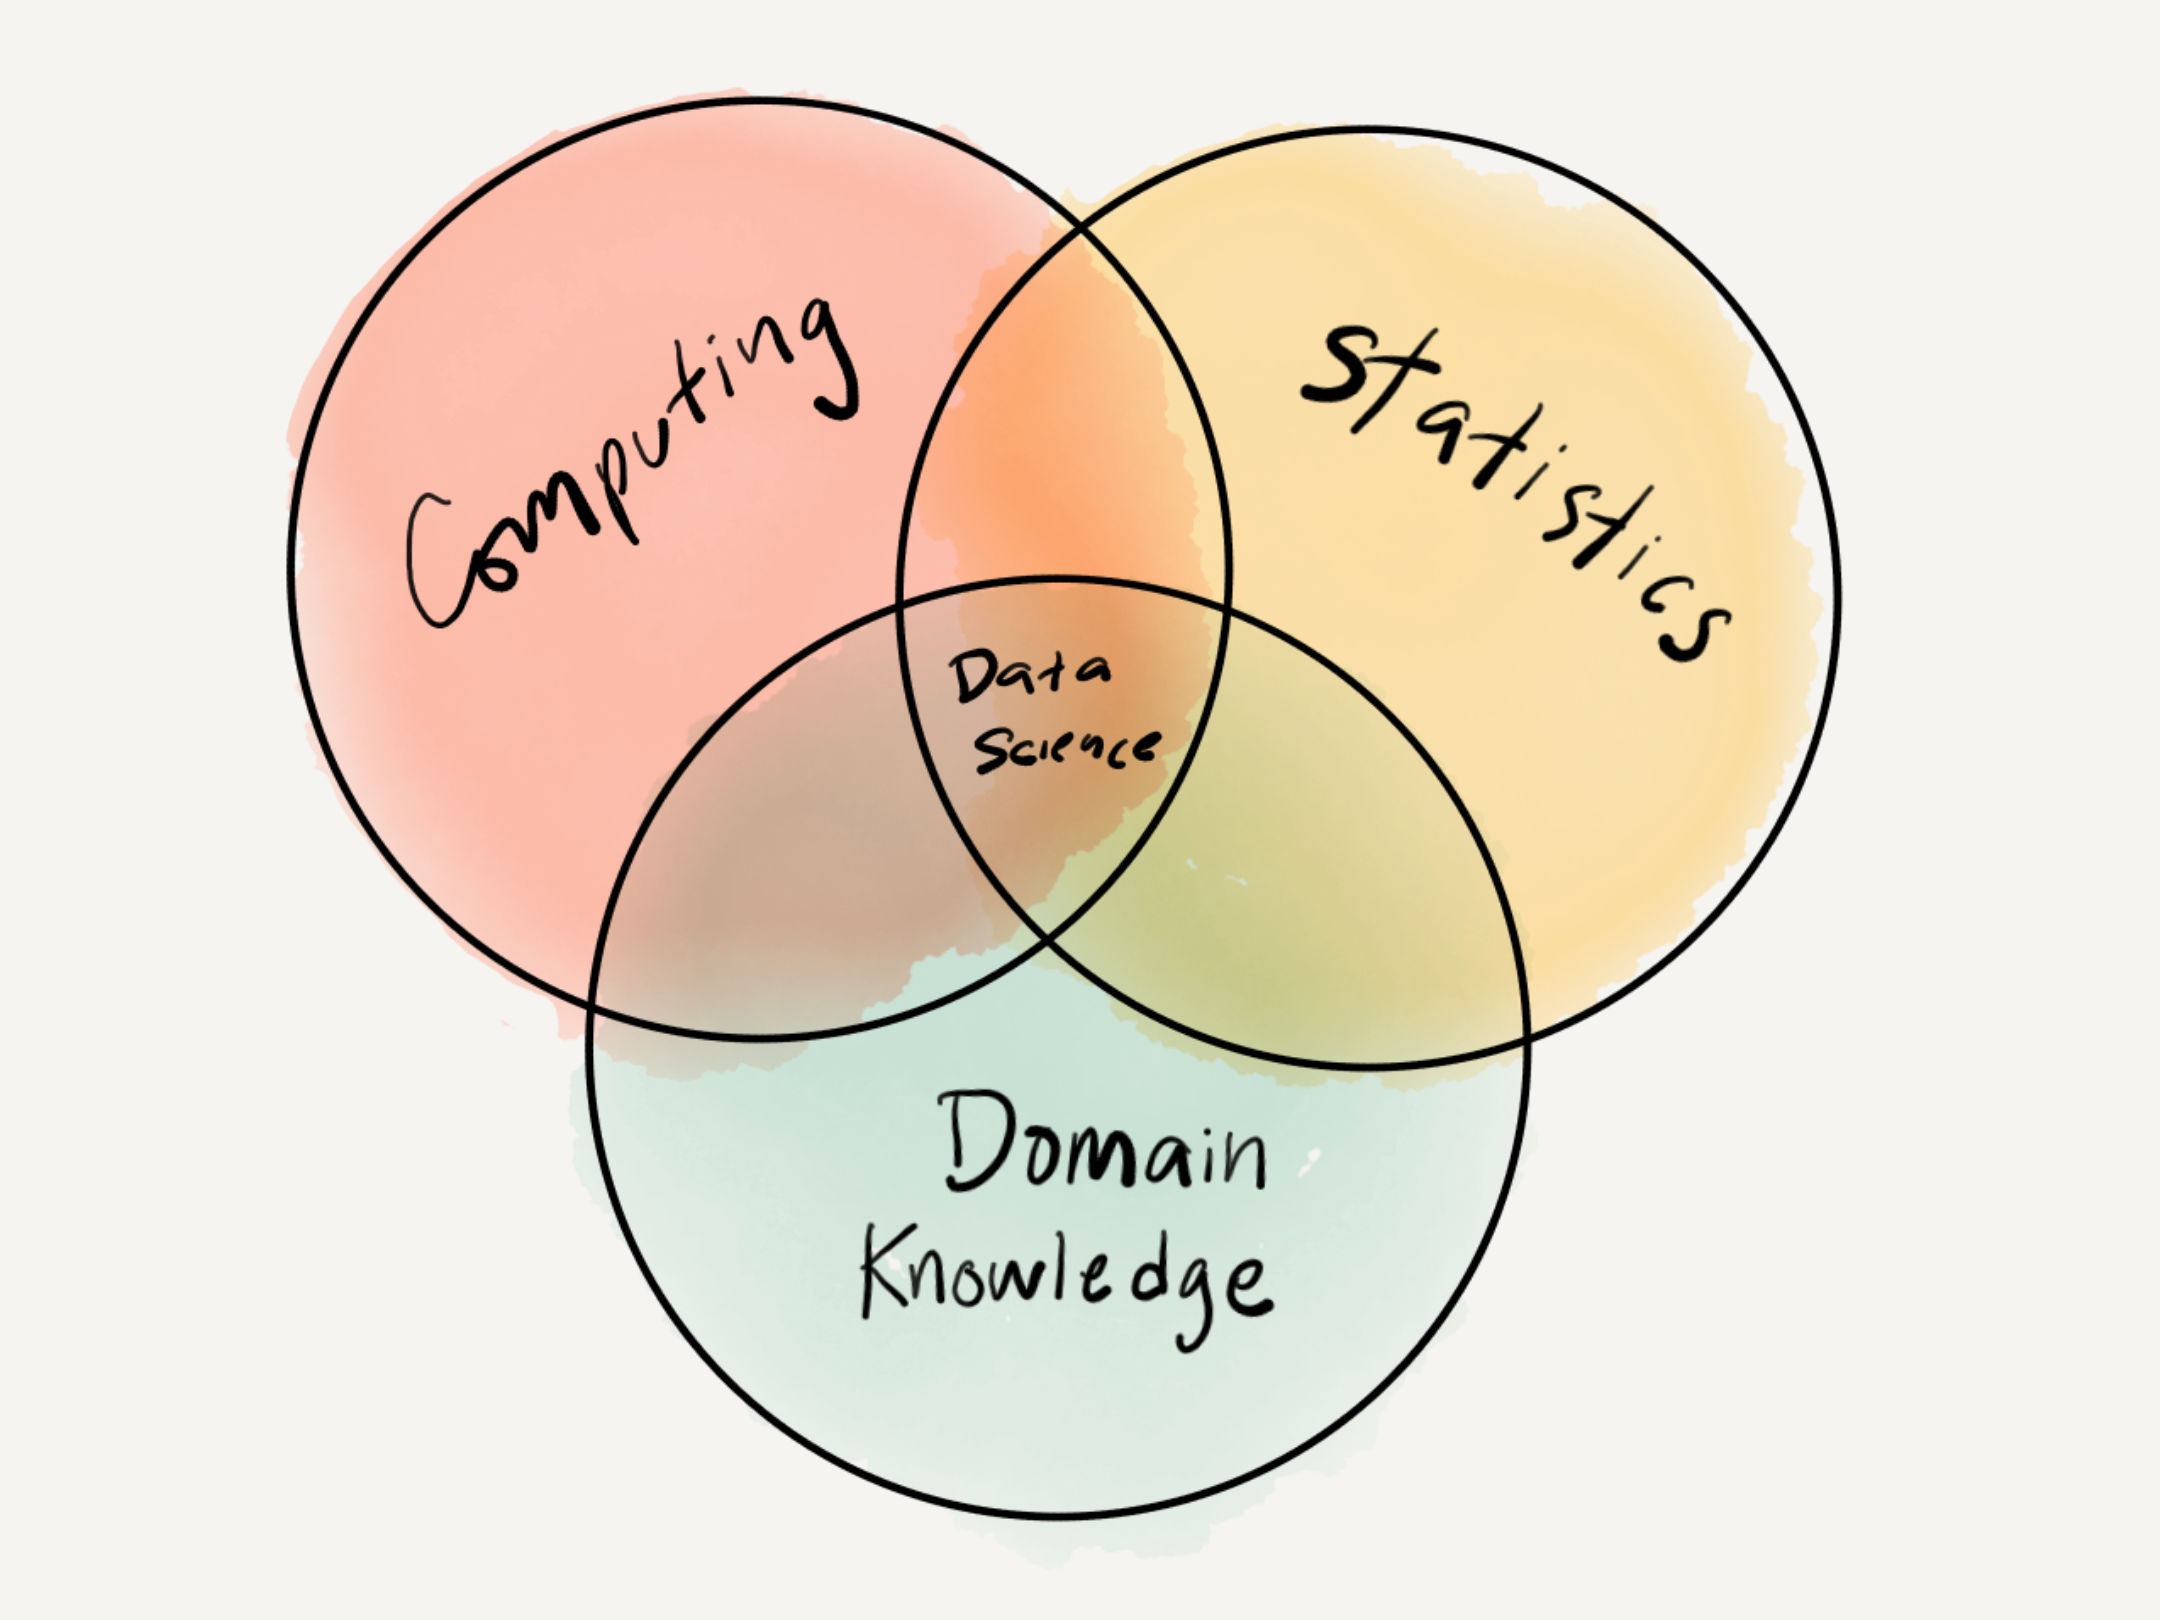 Data Science Venn Diagram adapted from [Drew Conway](http://drewconway.com/zia/2013/3/26/the-data-science-venn-diagram).